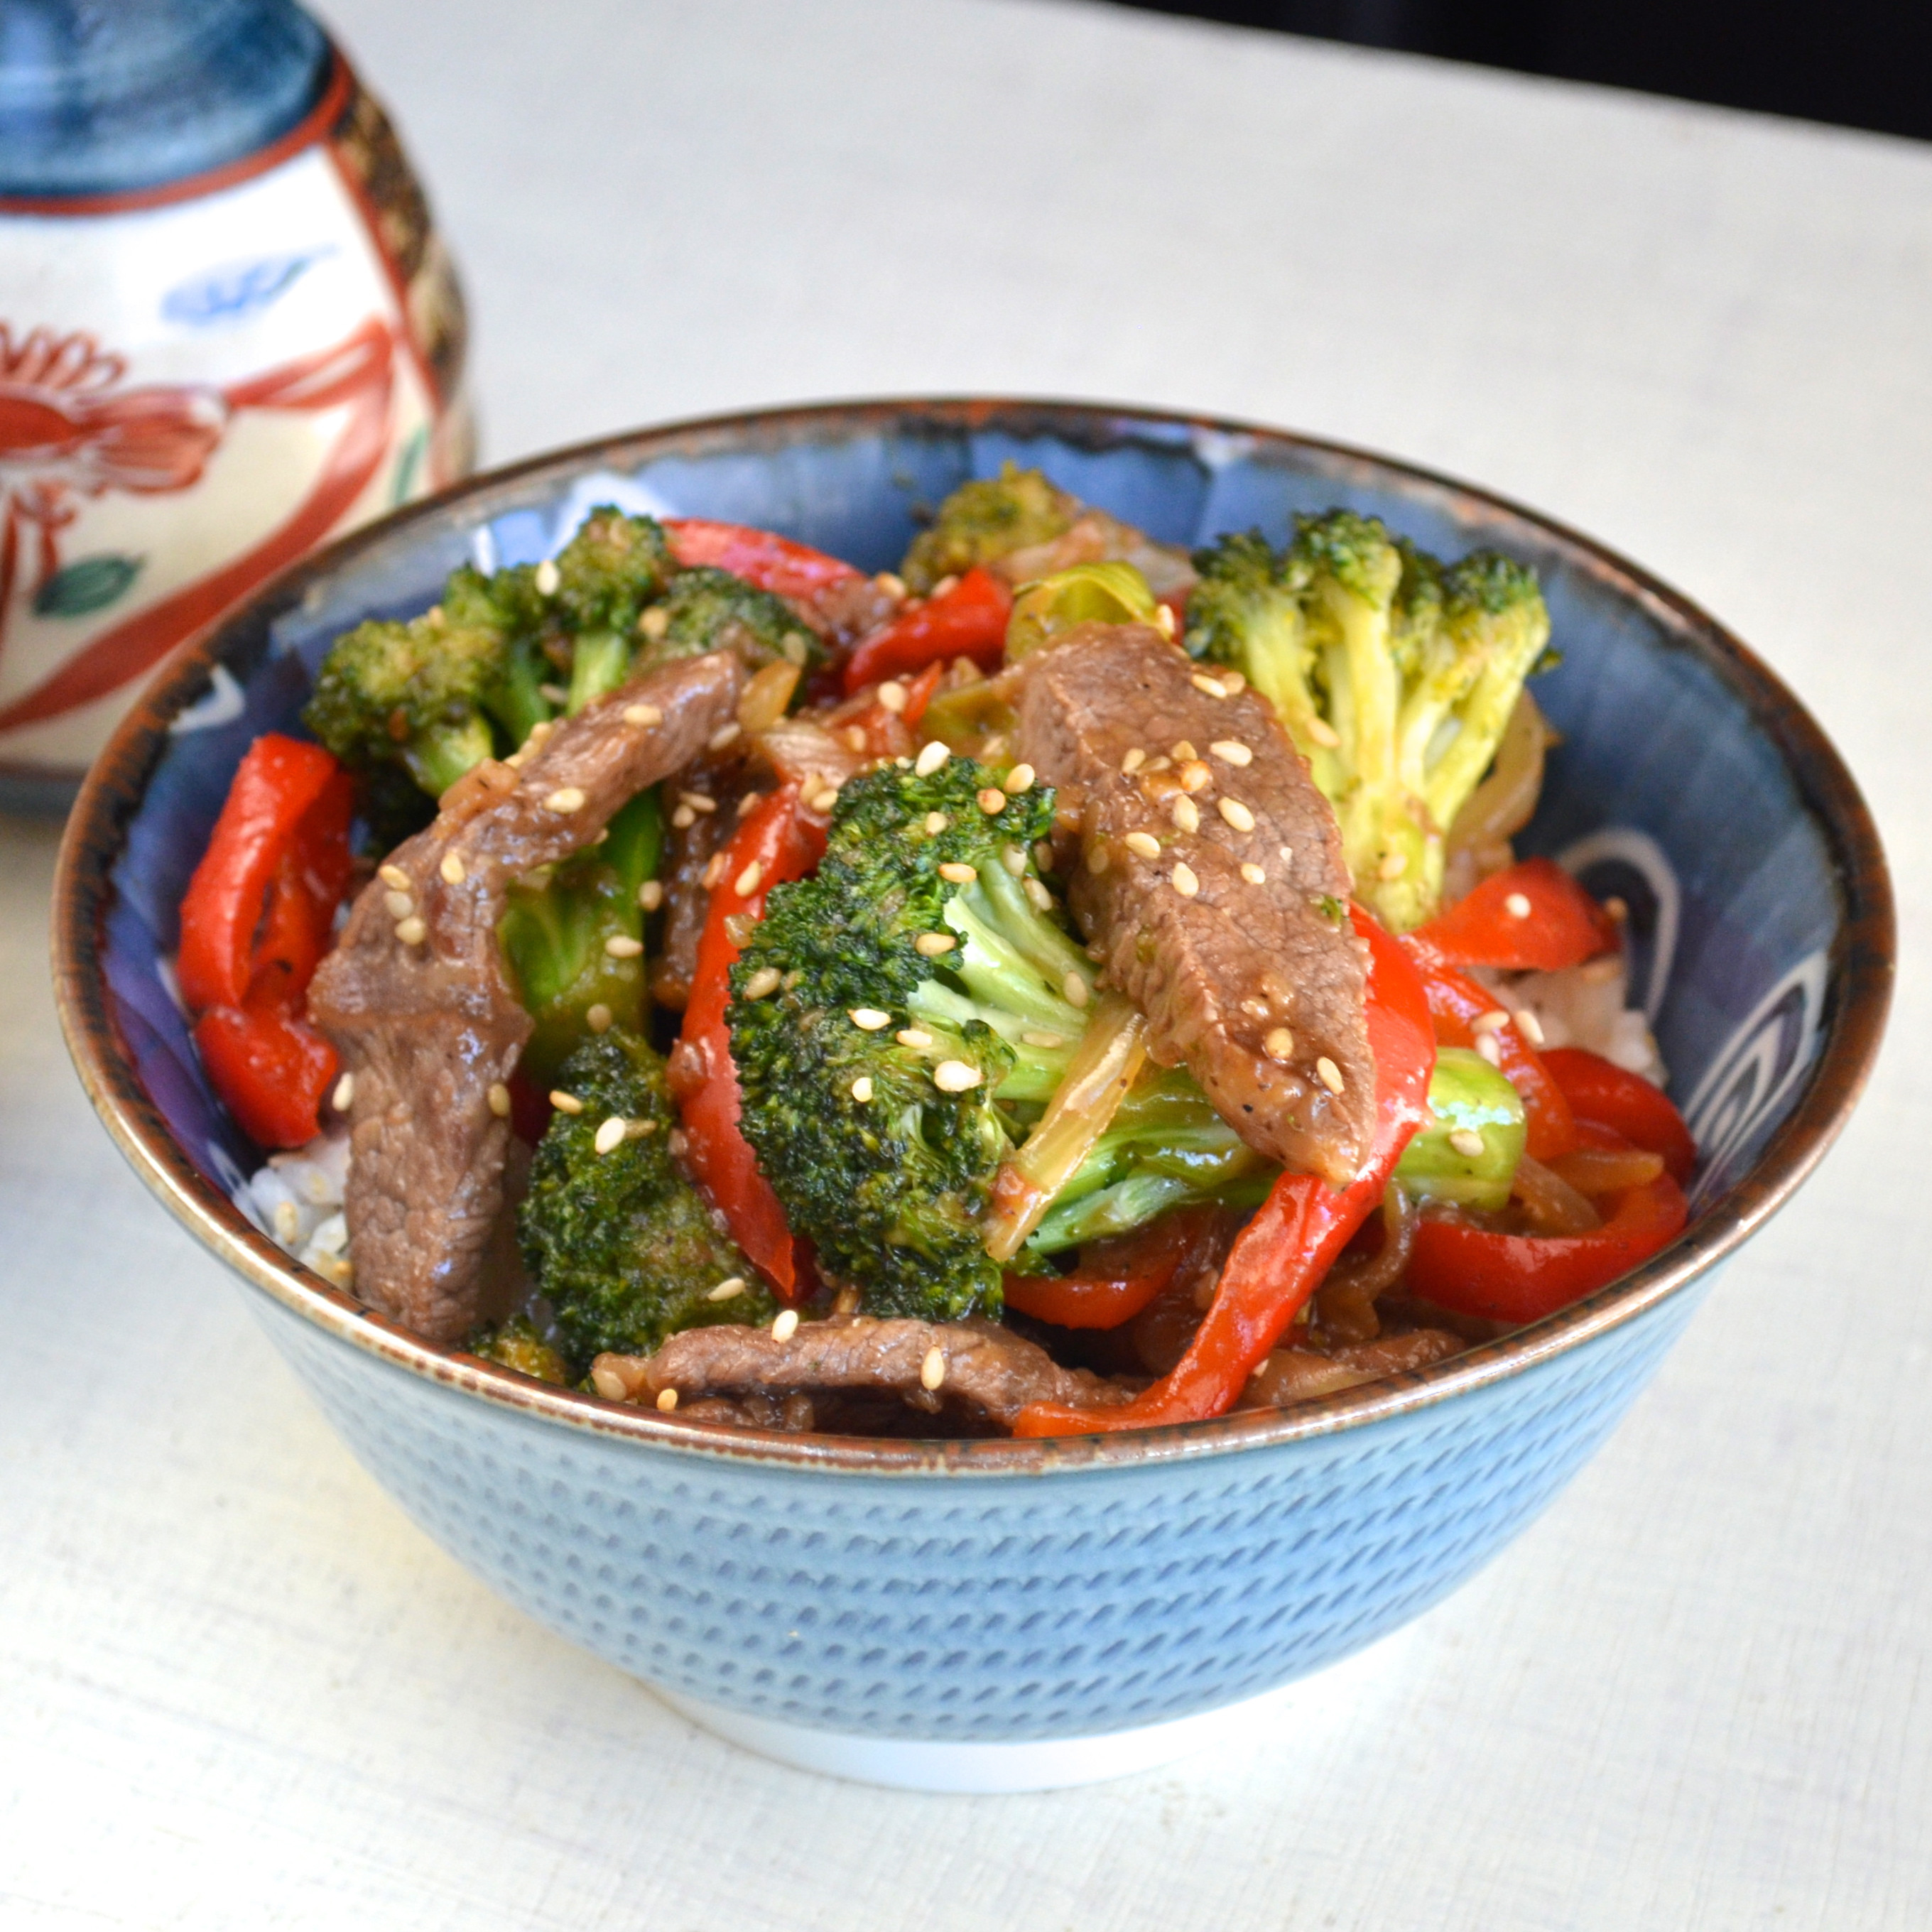 Broccoli And Beef
 Broccoli and Beef Recipe